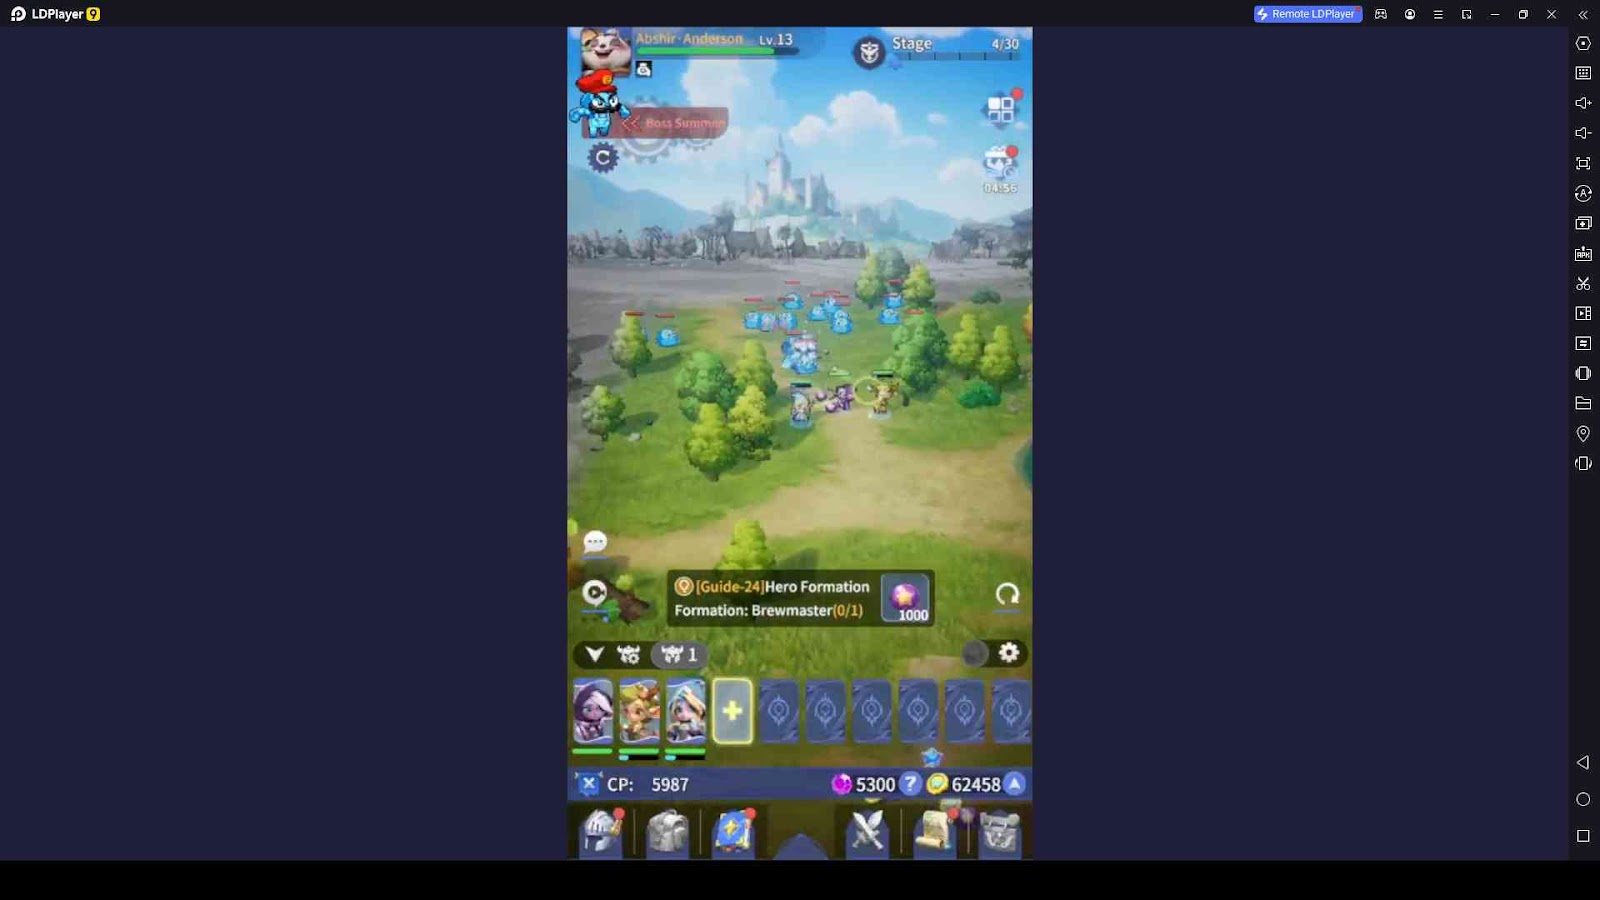 Use Potions and Runes to Favor the Heroes in Battles 